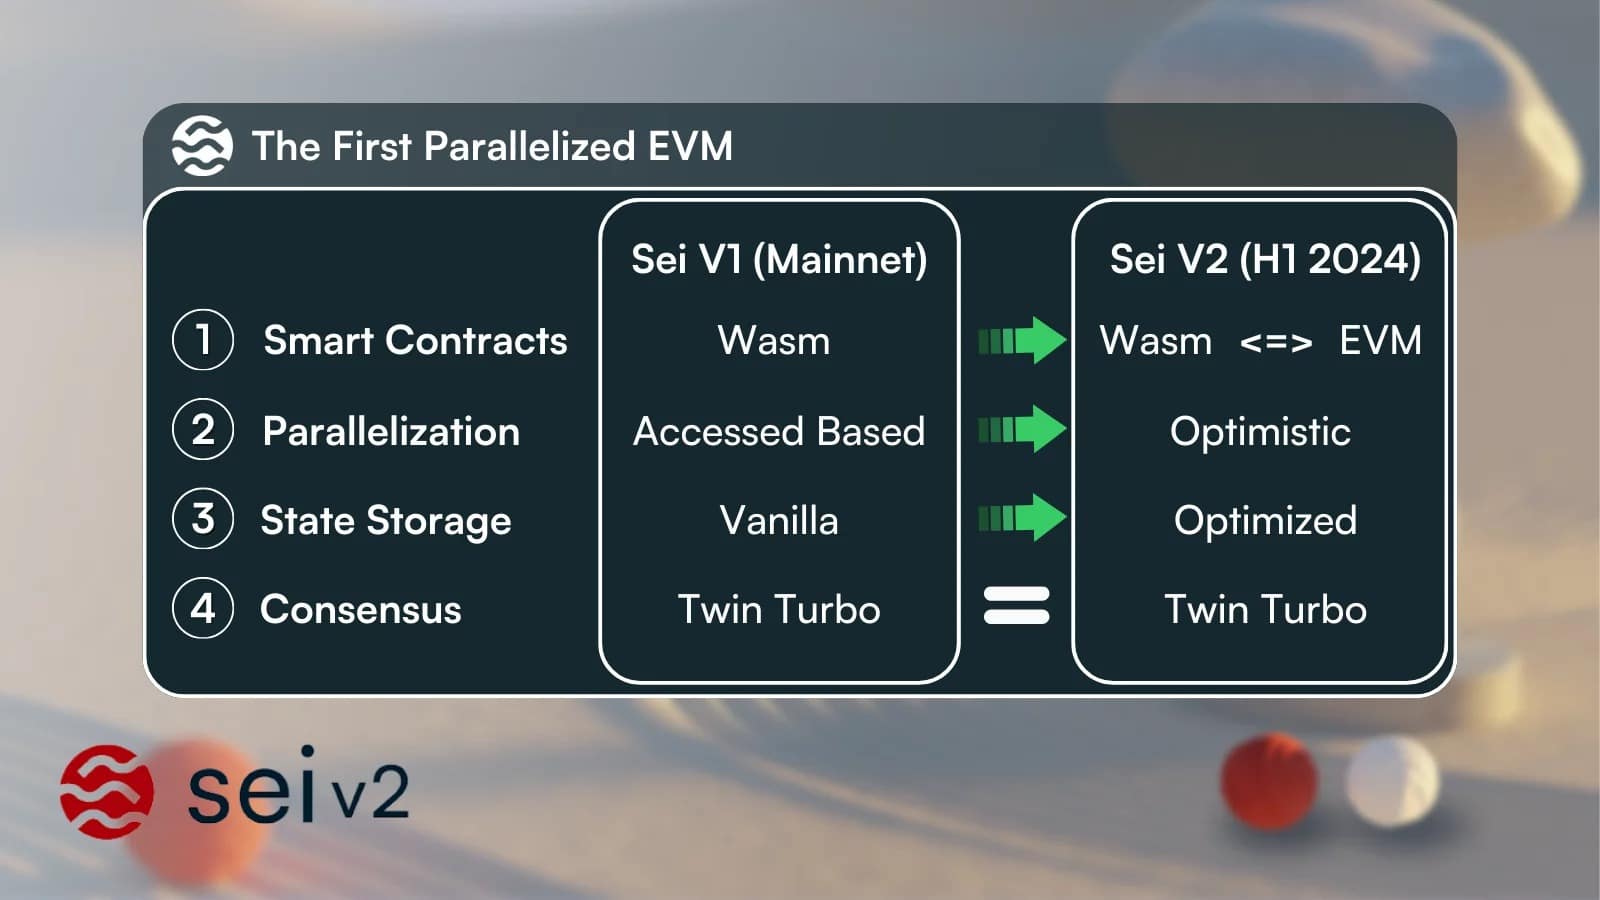 Illustration of Sei V2 operation and specifications